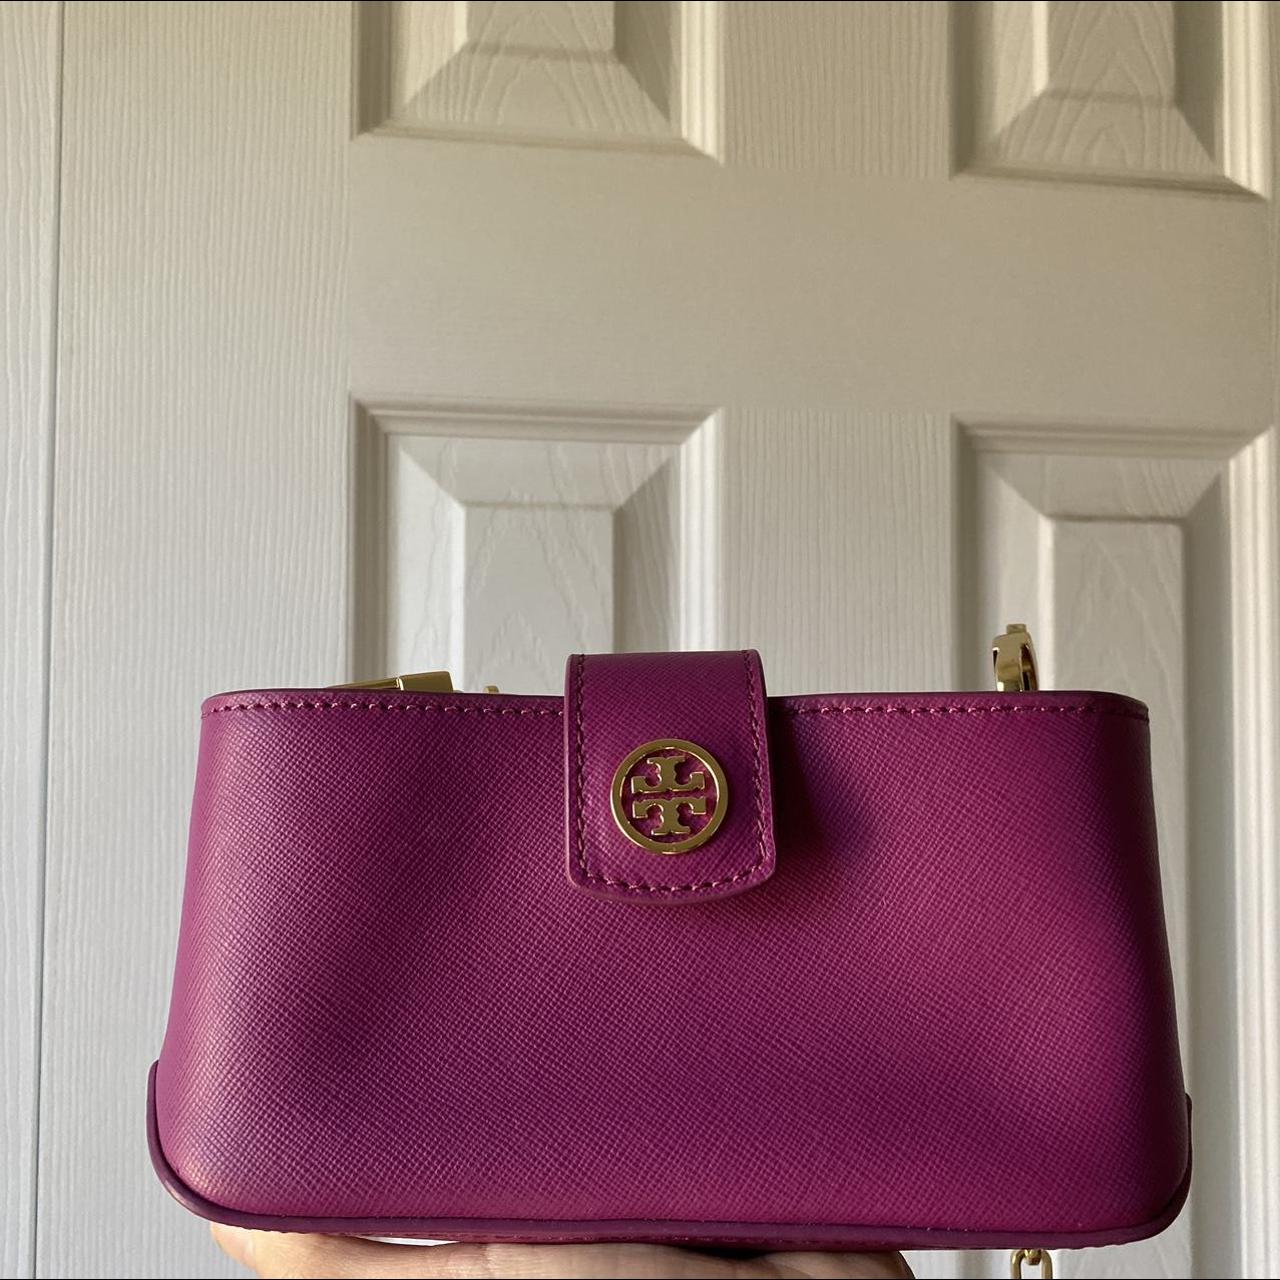 Tory Burch sale: Shop deals on purses, shoes, and clothing - Reviewed